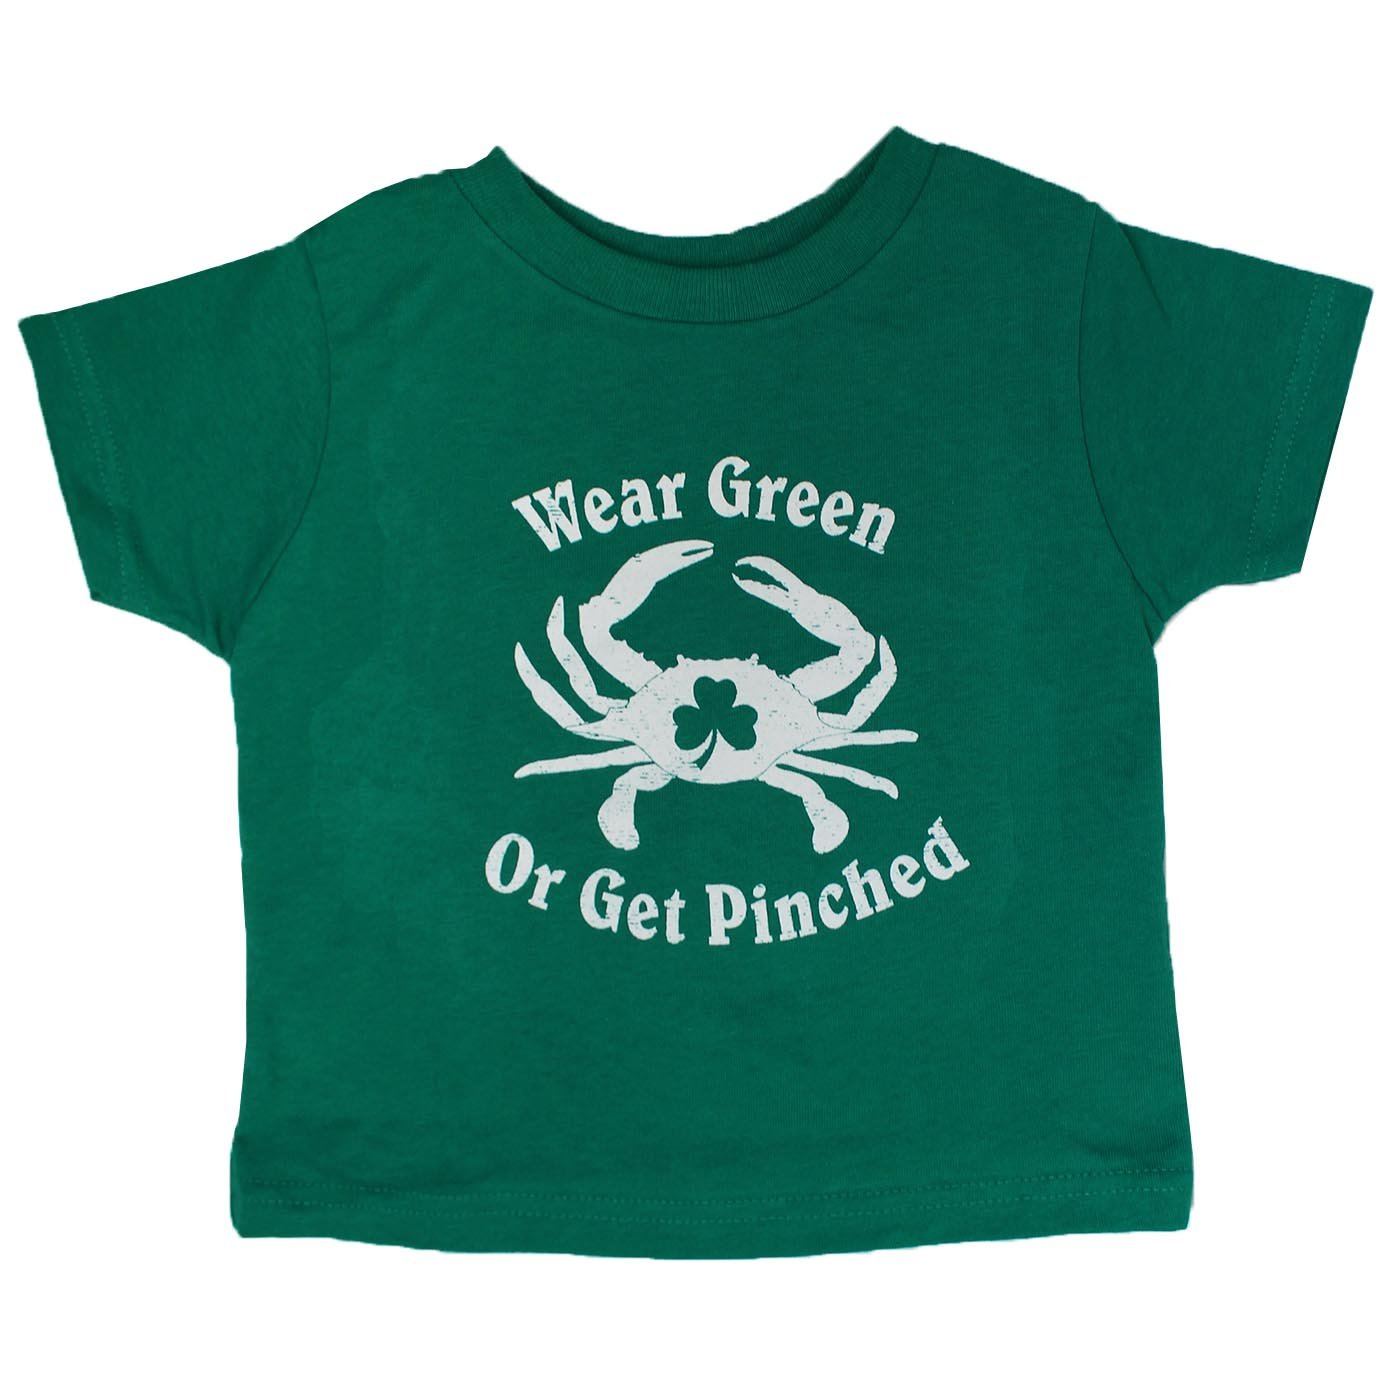 Wear Green or Get Pinched (Green) / *Toddler* Shirt - Route One Apparel